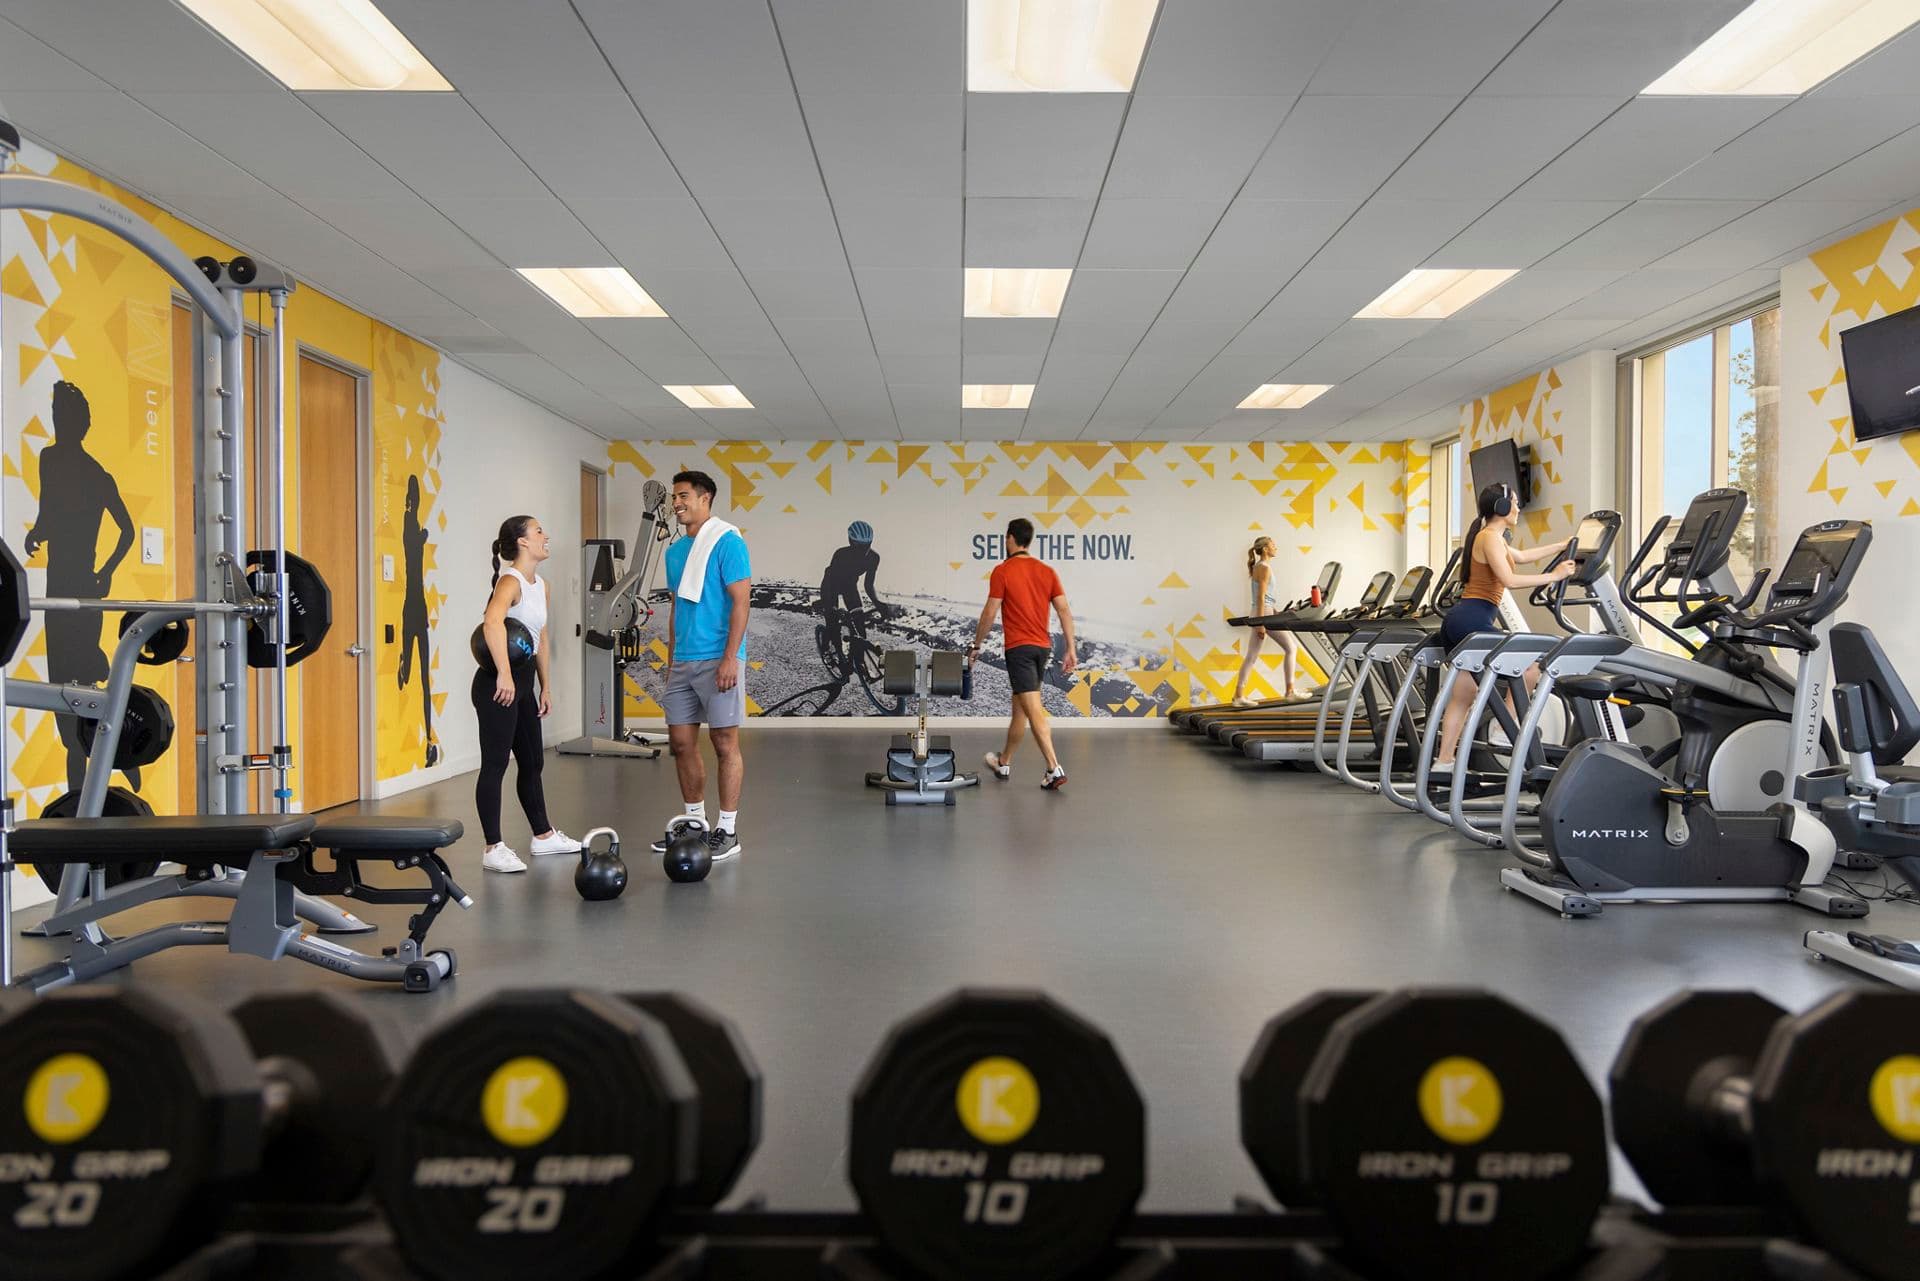 Lifestyle photography of the Kinetic Fitness amenity at Irvine Business Center, Irvine, CA